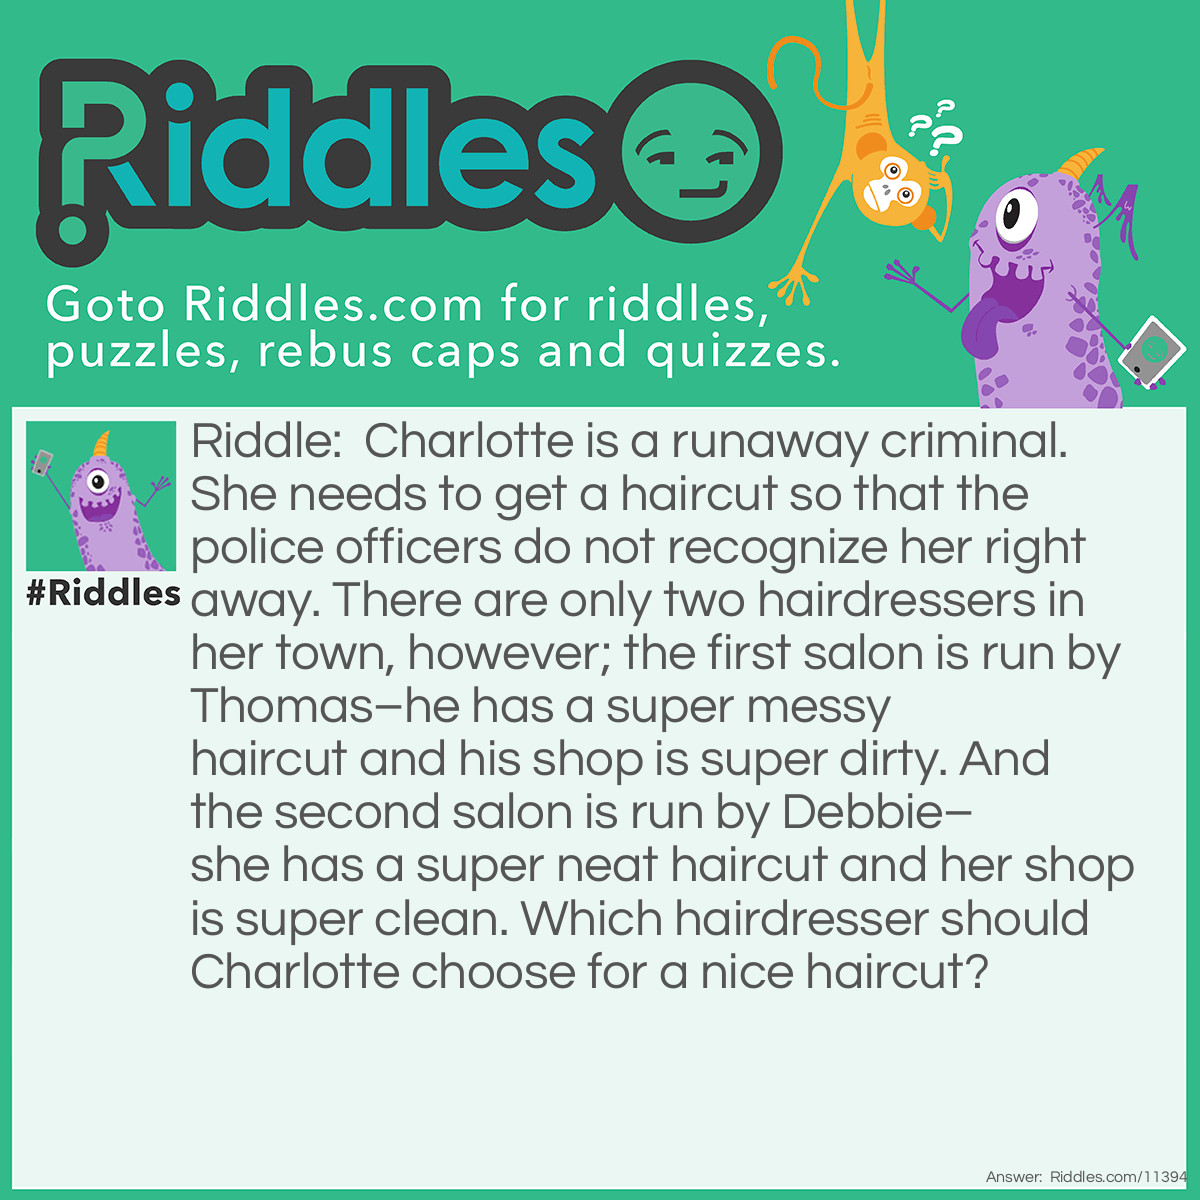 Riddle: Charlotte is a runaway criminal. She needs to get a haircut so that the police officers do not recognize her right away. There are only two hairdressers in her town, however; the first salon is run by Thomas–he has a super messy haircut and his shop is super dirty. And the second salon is run by Debbie–she has a super neat haircut and her shop is super clean. Which hairdresser should Charlotte choose for a nice haircut? Answer: Charlotte should choose Thomas. Since there are only two hairdressers in her town, they can't cut their own hair; they gave haircuts to each other (Thomas cuts Debbie's hair, and Debbie cuts Thomas' hair). Since Thomas must have been the one to give Debbie a neat haircut, and Debbie must have been the one to give Thomas a messy haircut, Thomas is much more professional, and Charlotte should get her hair done by him.